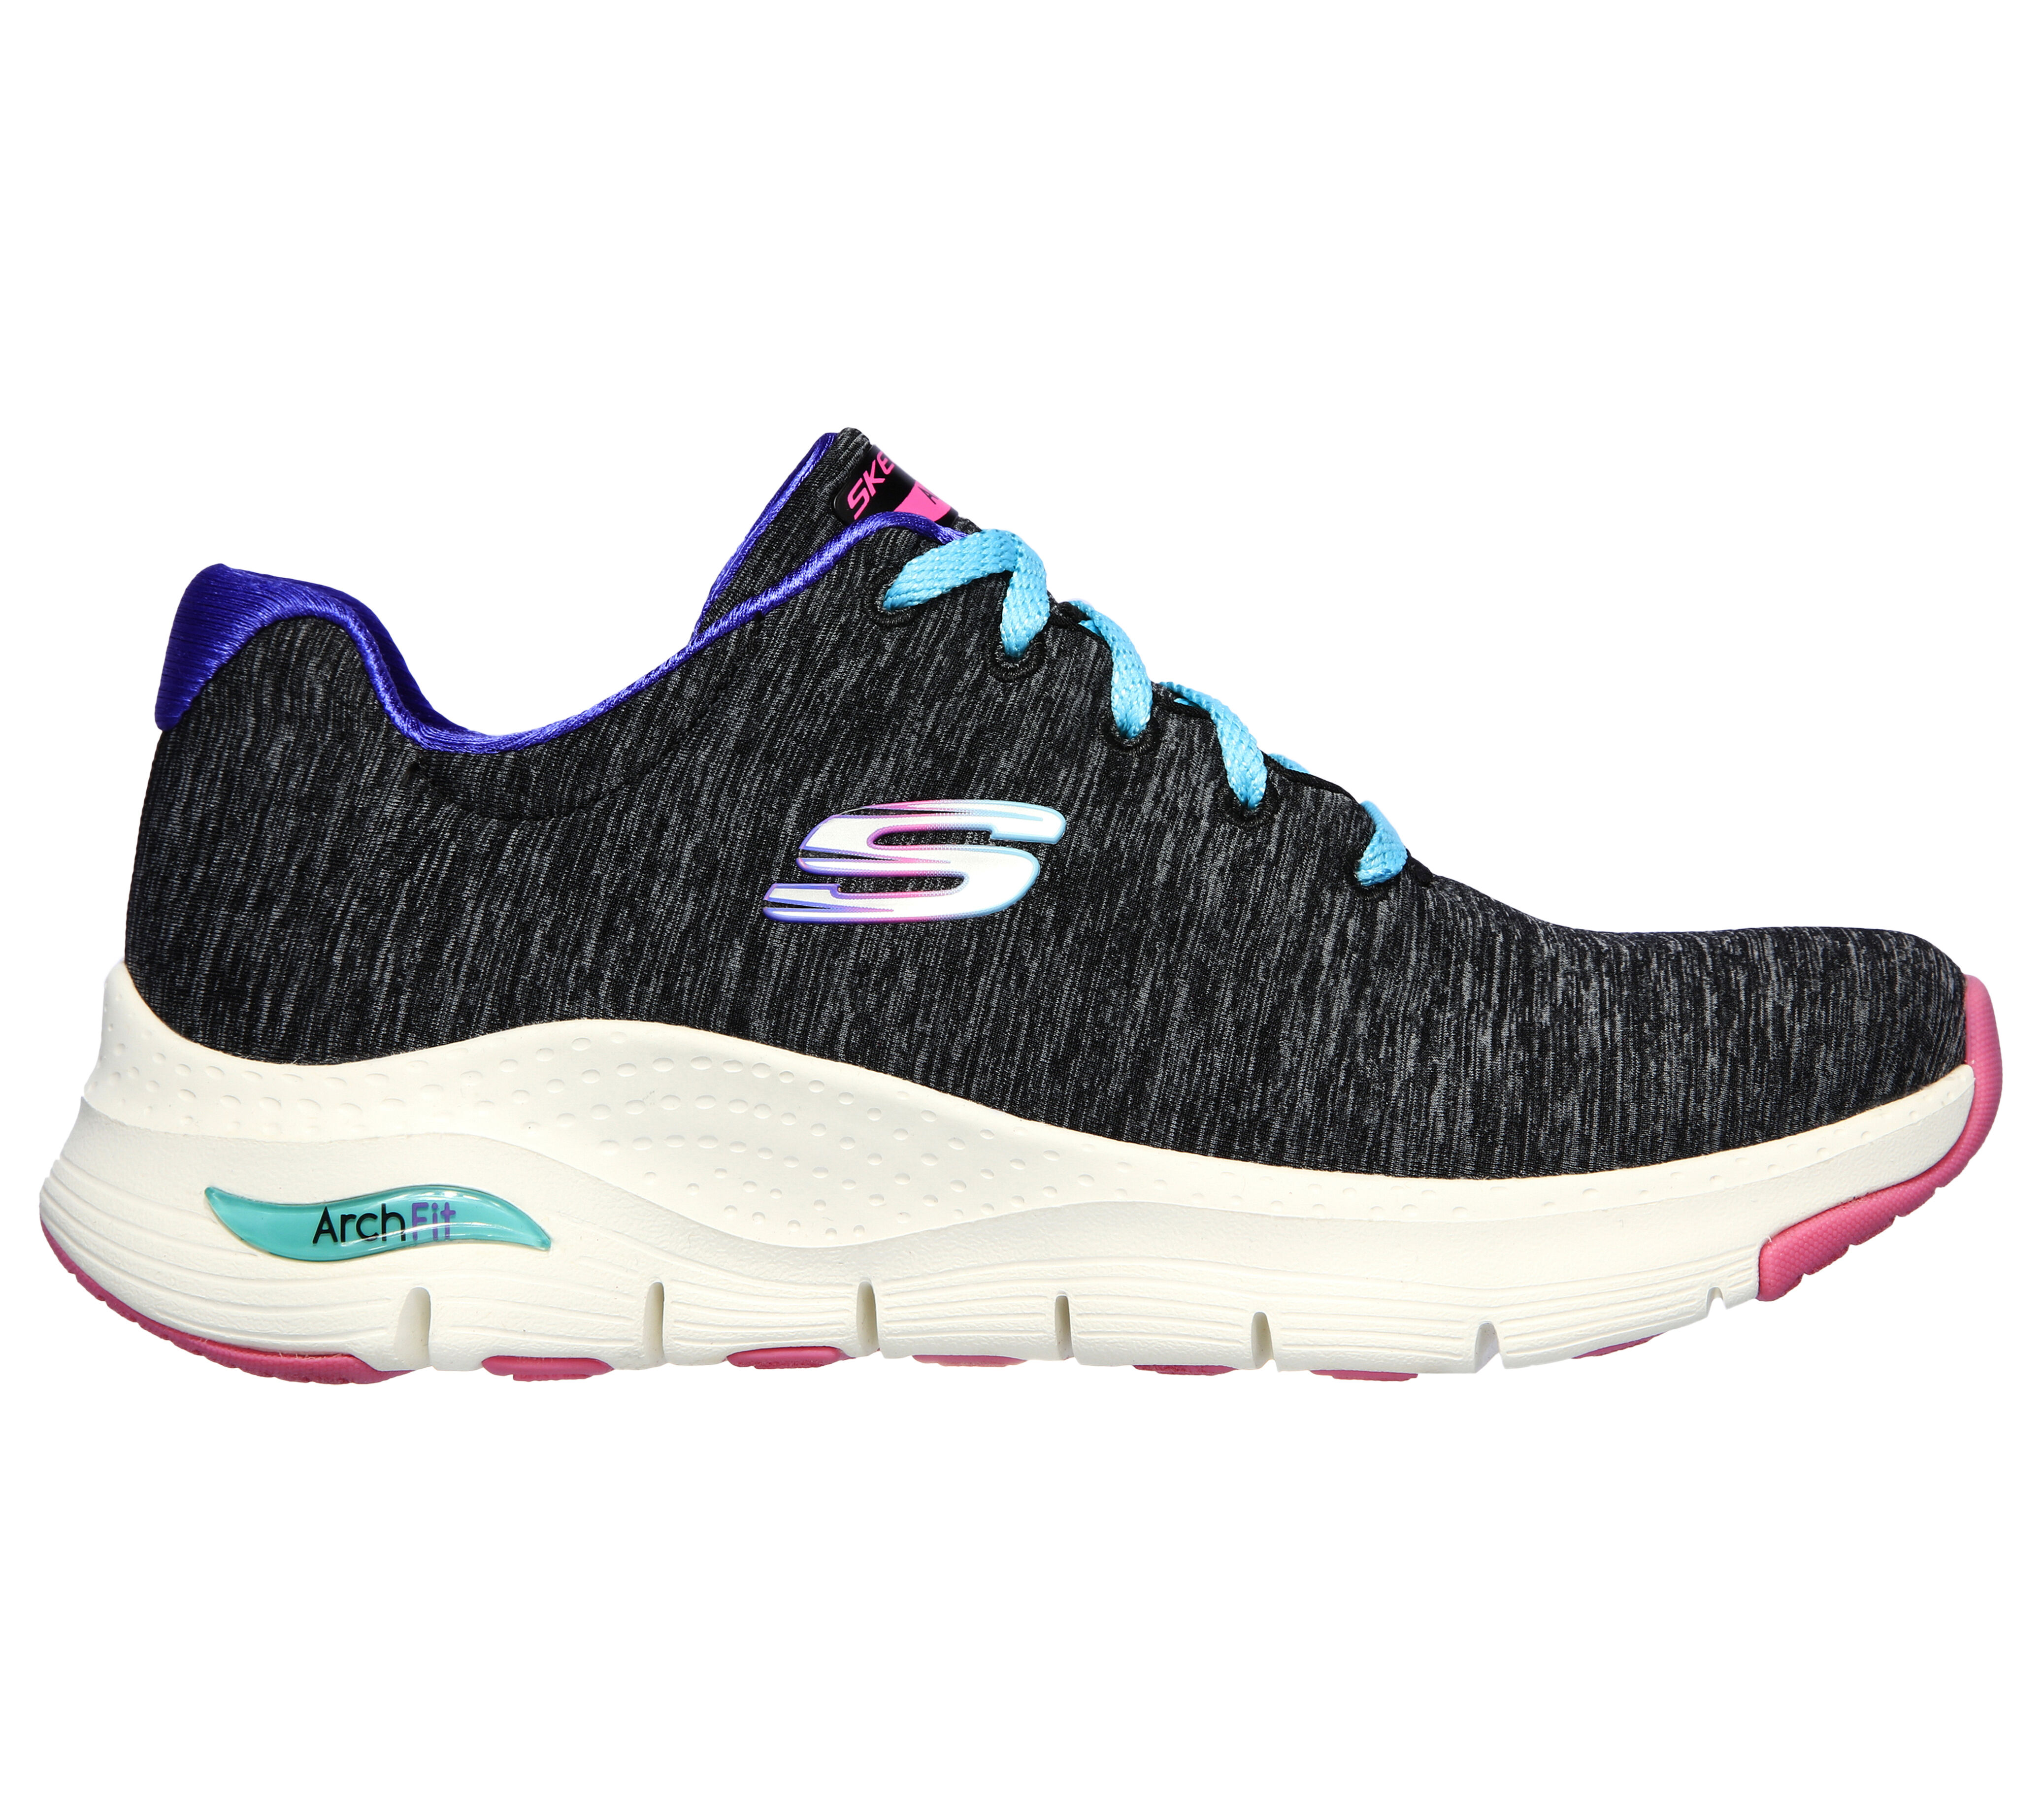 skechers arch fit washing instructions